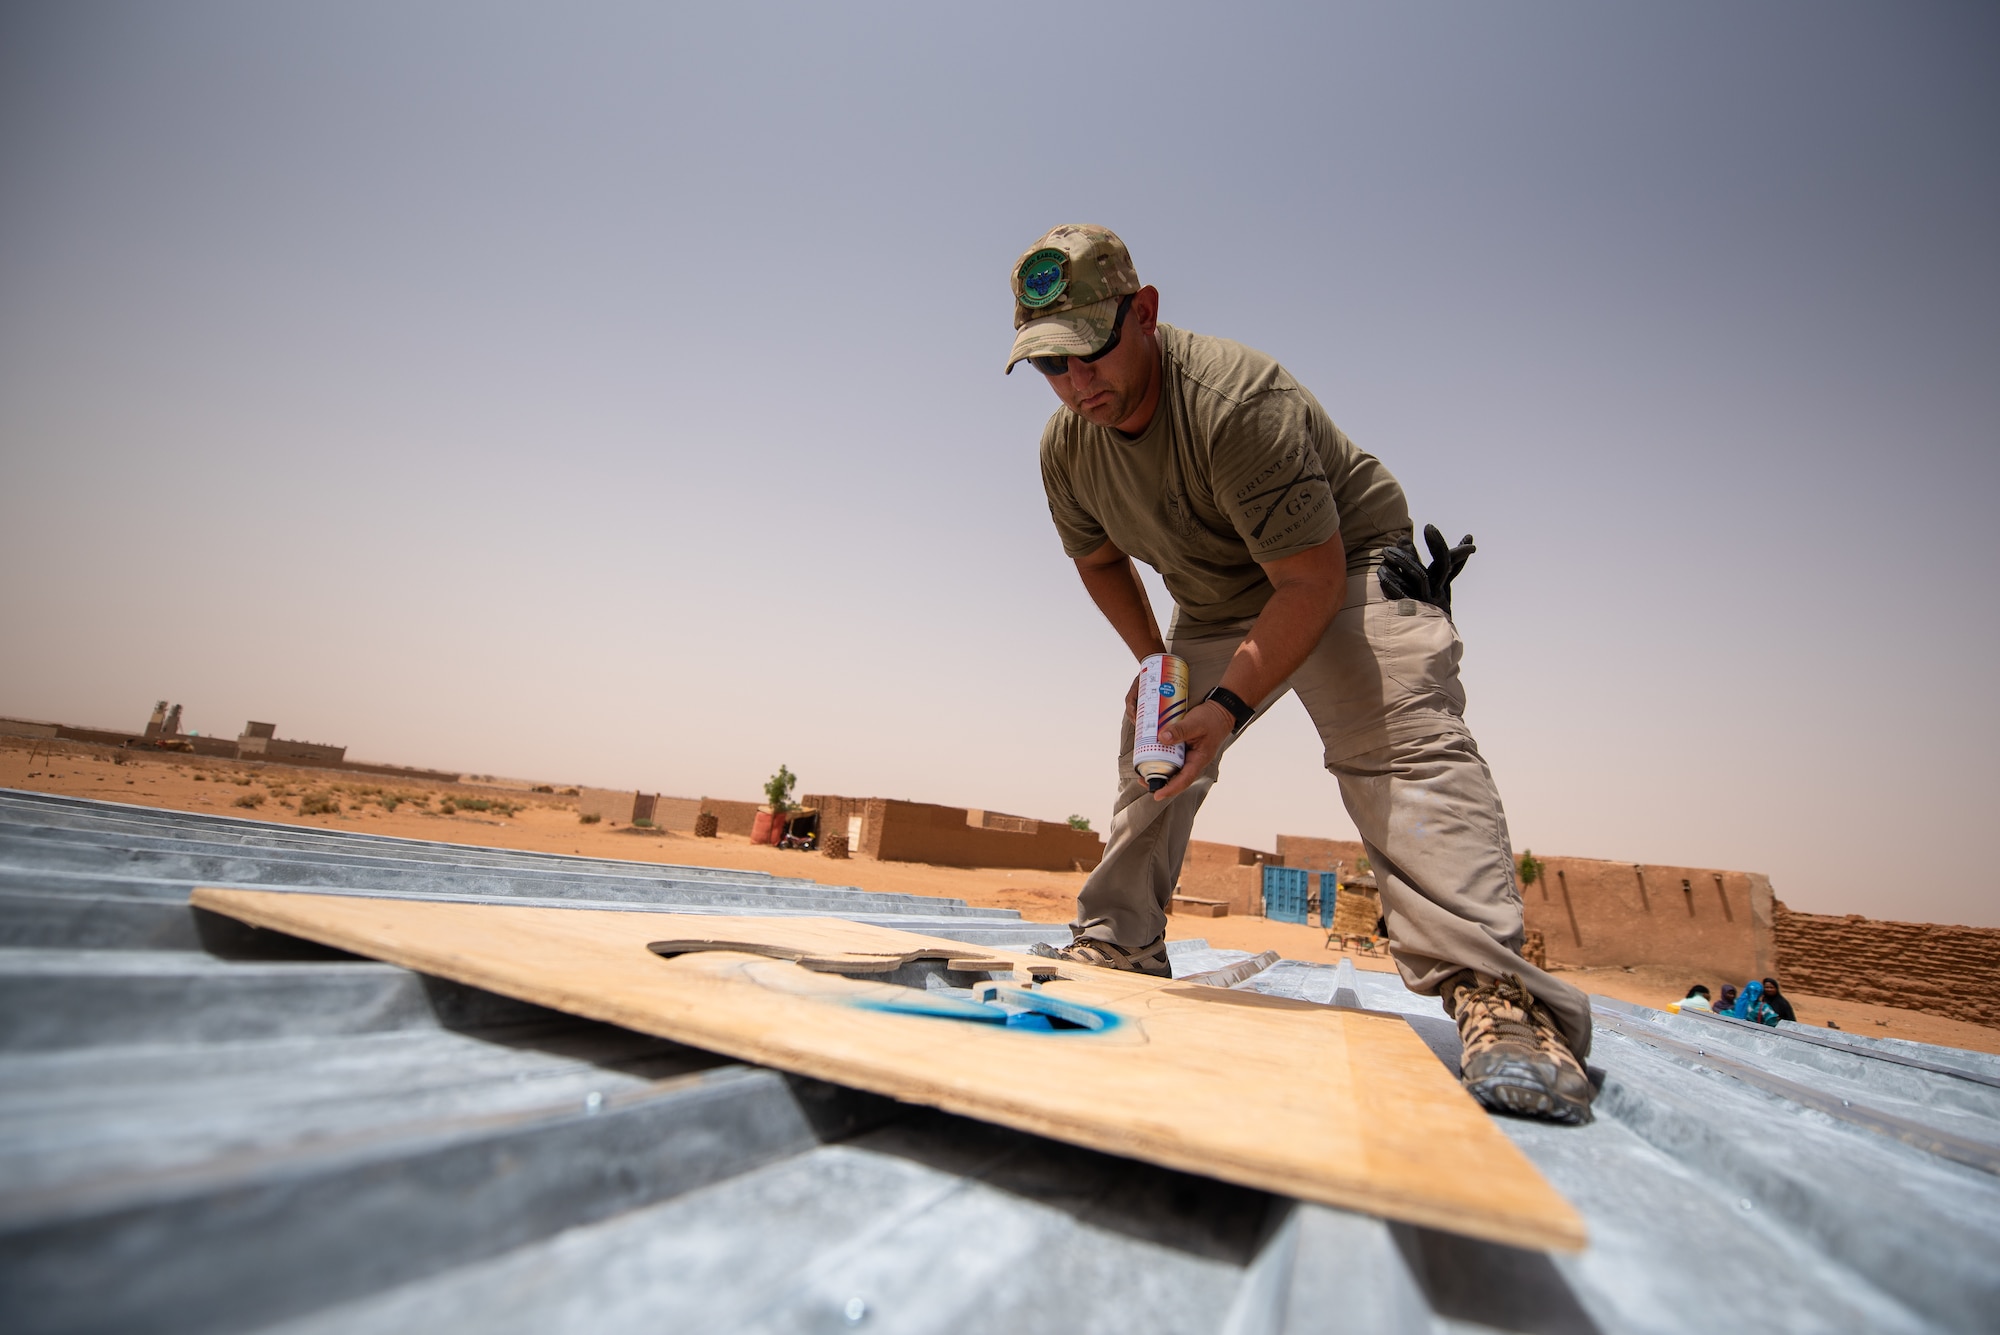 U.S. Air Force Tech. Sgt. Kelly Warren, 724th Expeditionary Air Base Squadron civil engineer flight structural craftsman, paints a bull head on the roof of a classroom at a village in Agadez, Niger, June 27, 2019. The civil engineers built the classroom from scratch and the bull is a symbol of the Prime Base Engineer Emergency Force, or Prime BEEF. (U.S. Air Force photo by Staff Sgt. Devin Boyer)